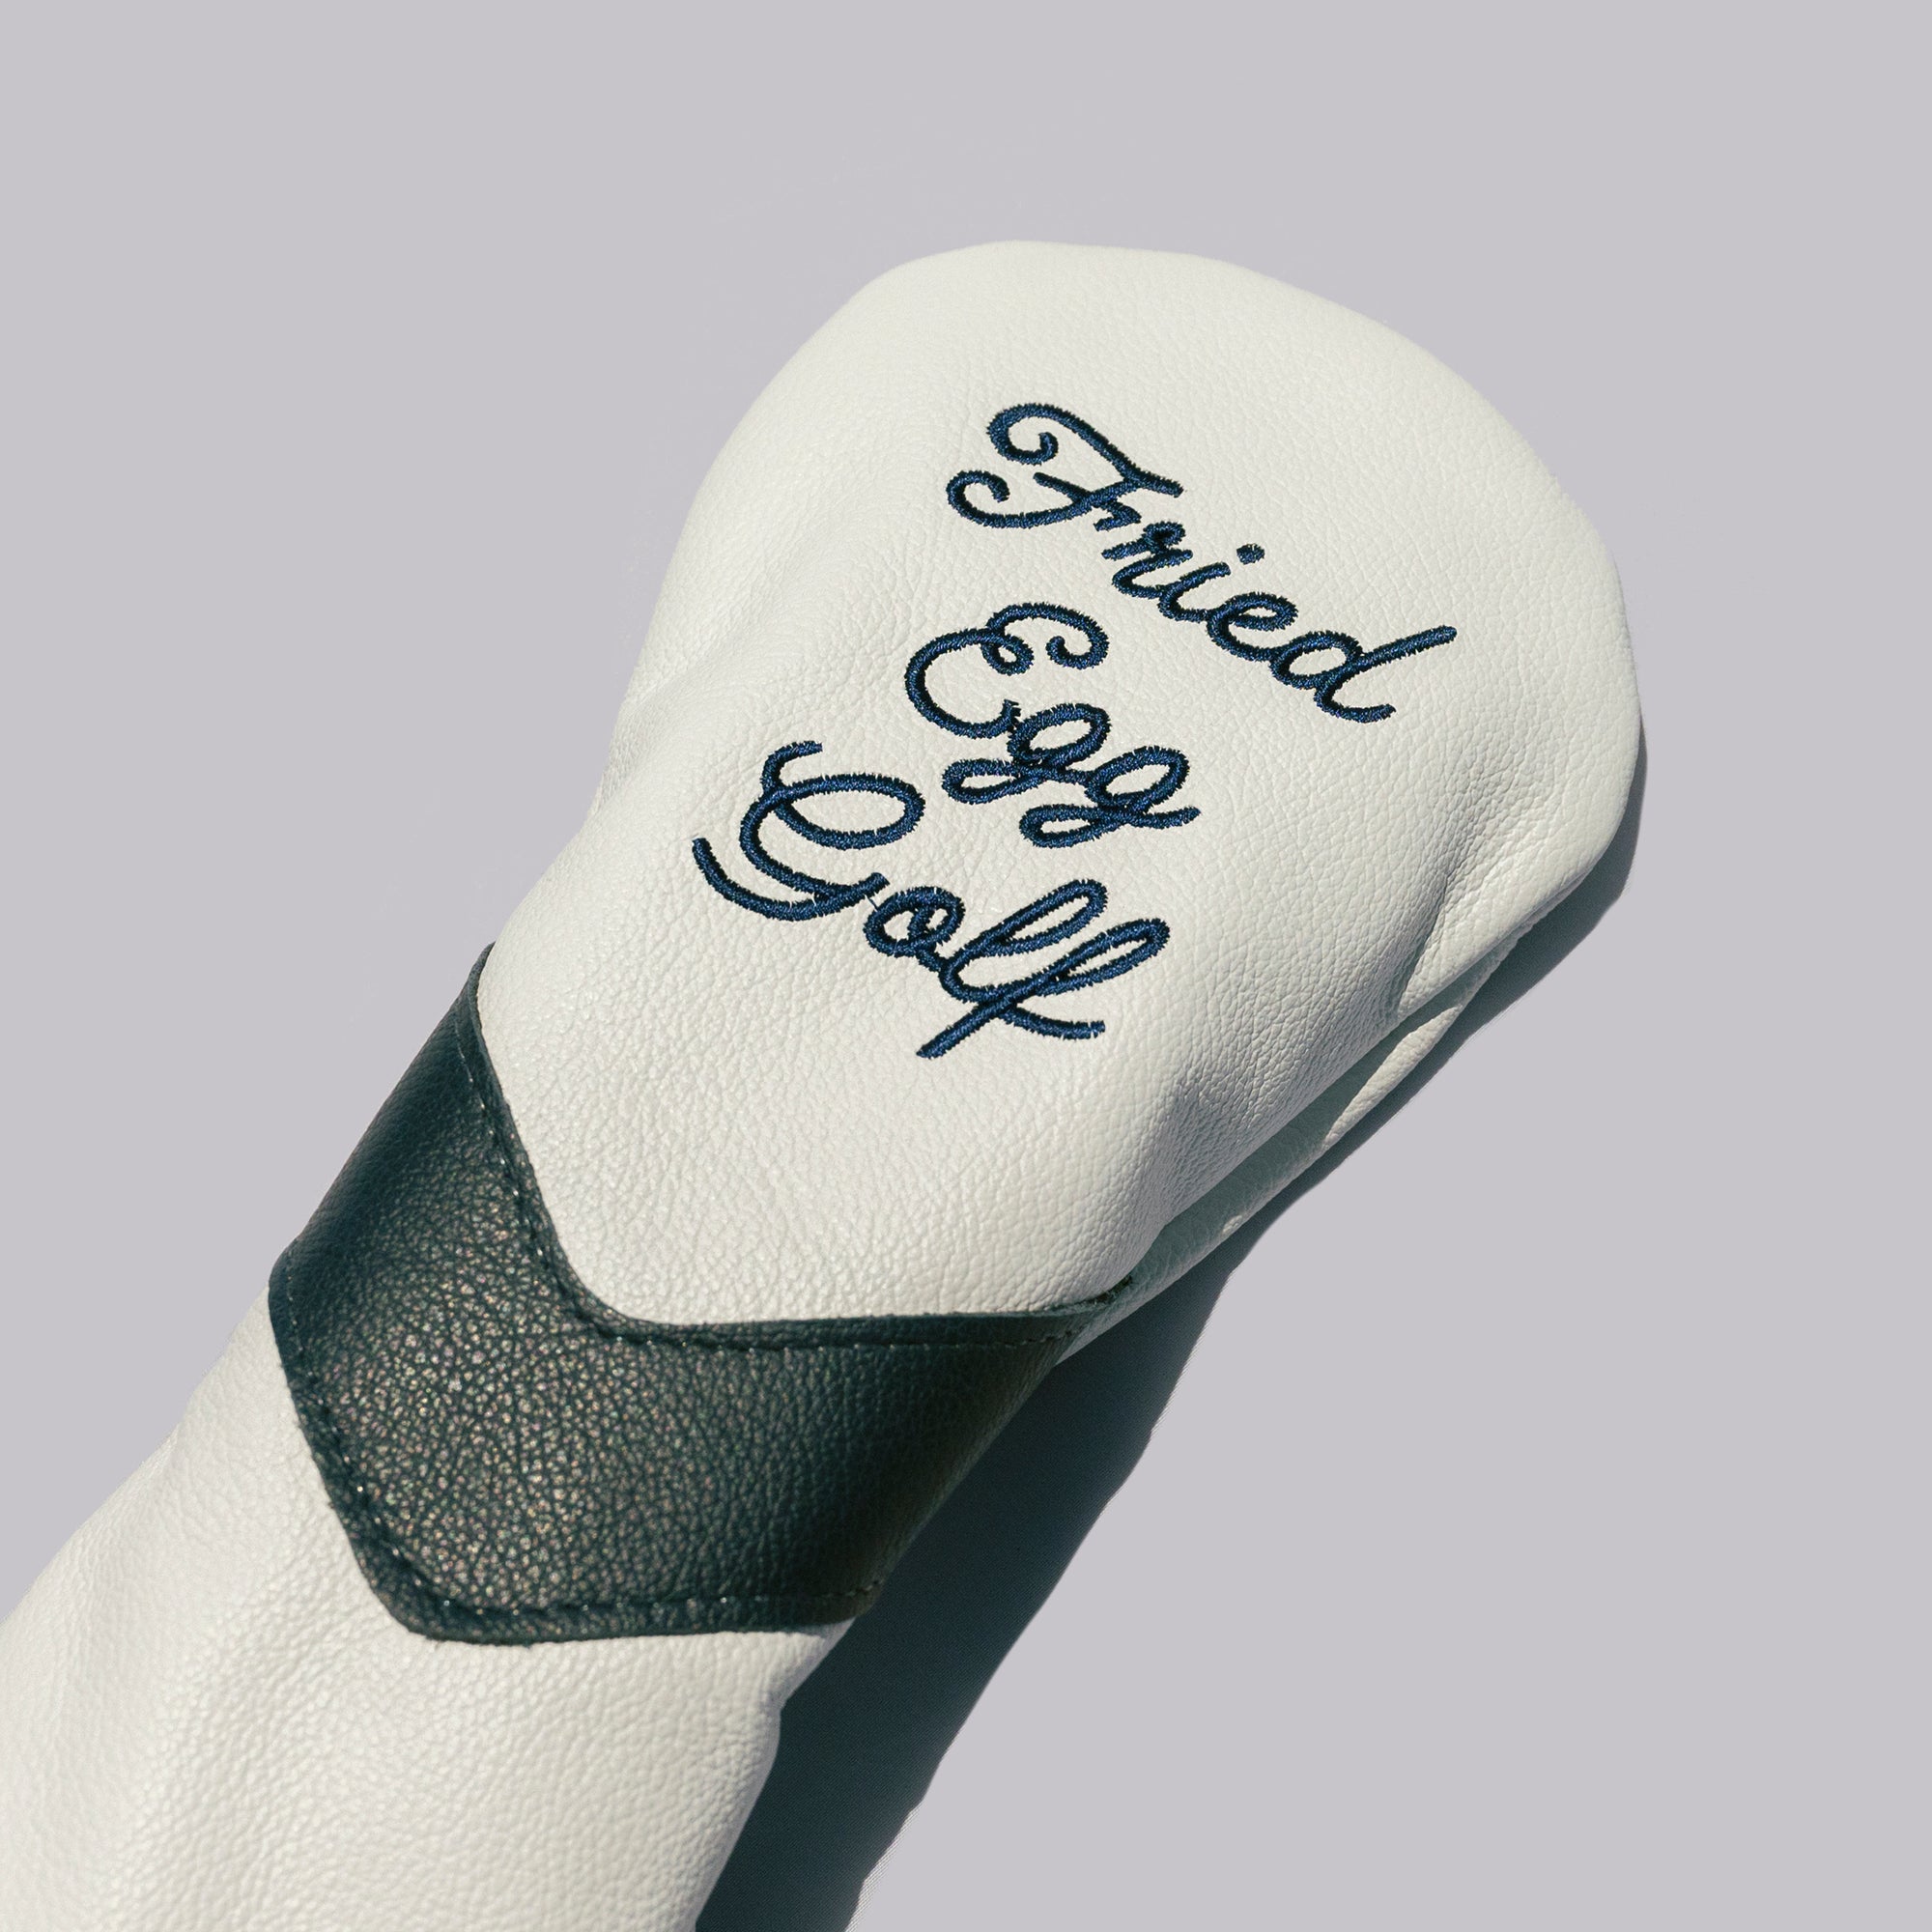 Fried Egg Golf White Leather Headcover - Fairway Wood